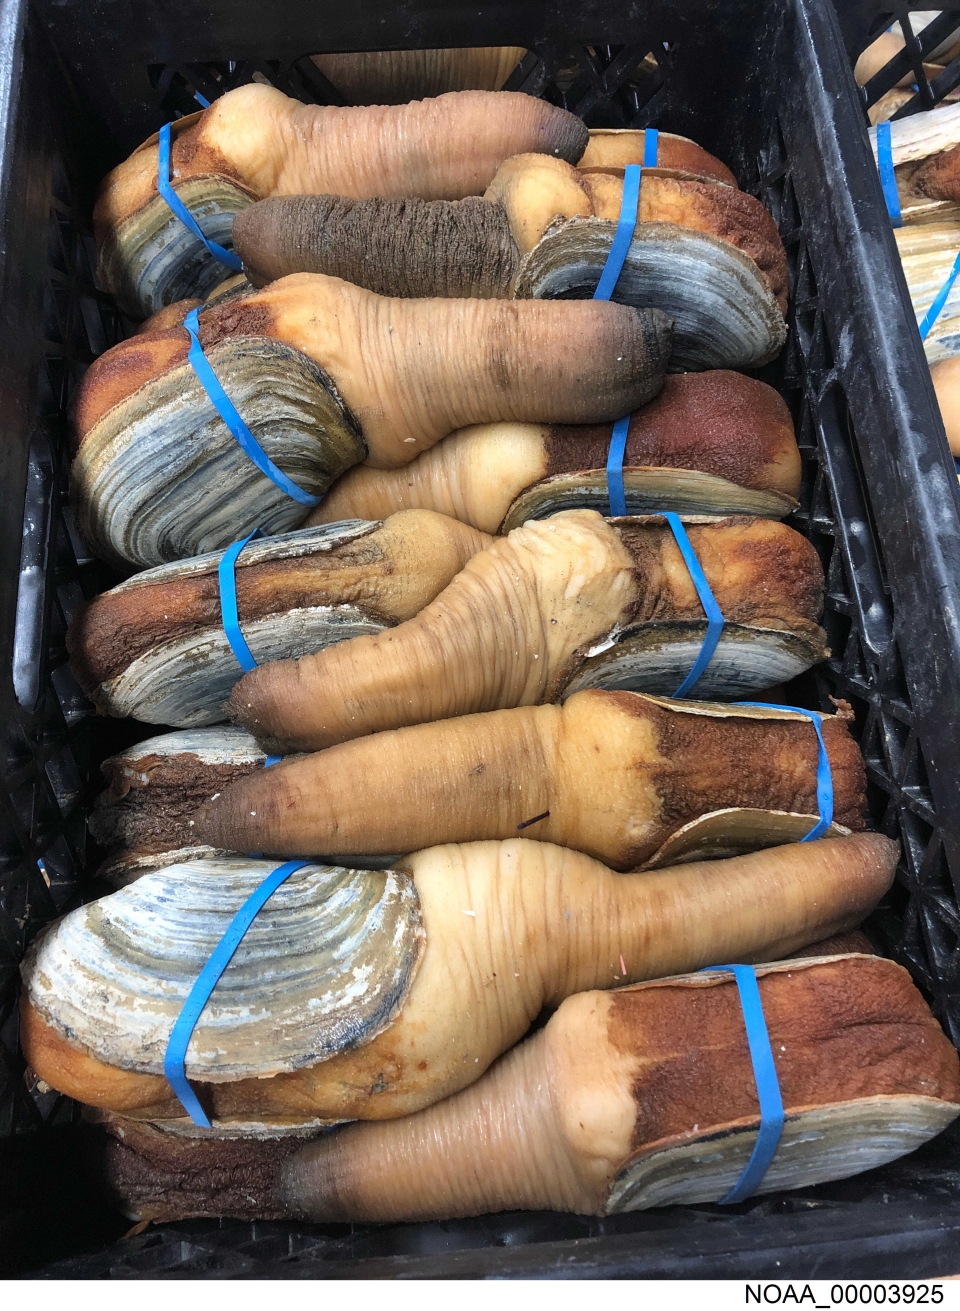 Washington Seafood Broker Lands Jail Time; Company Hit with $25K Fine for Illegal Geoduck Shipments